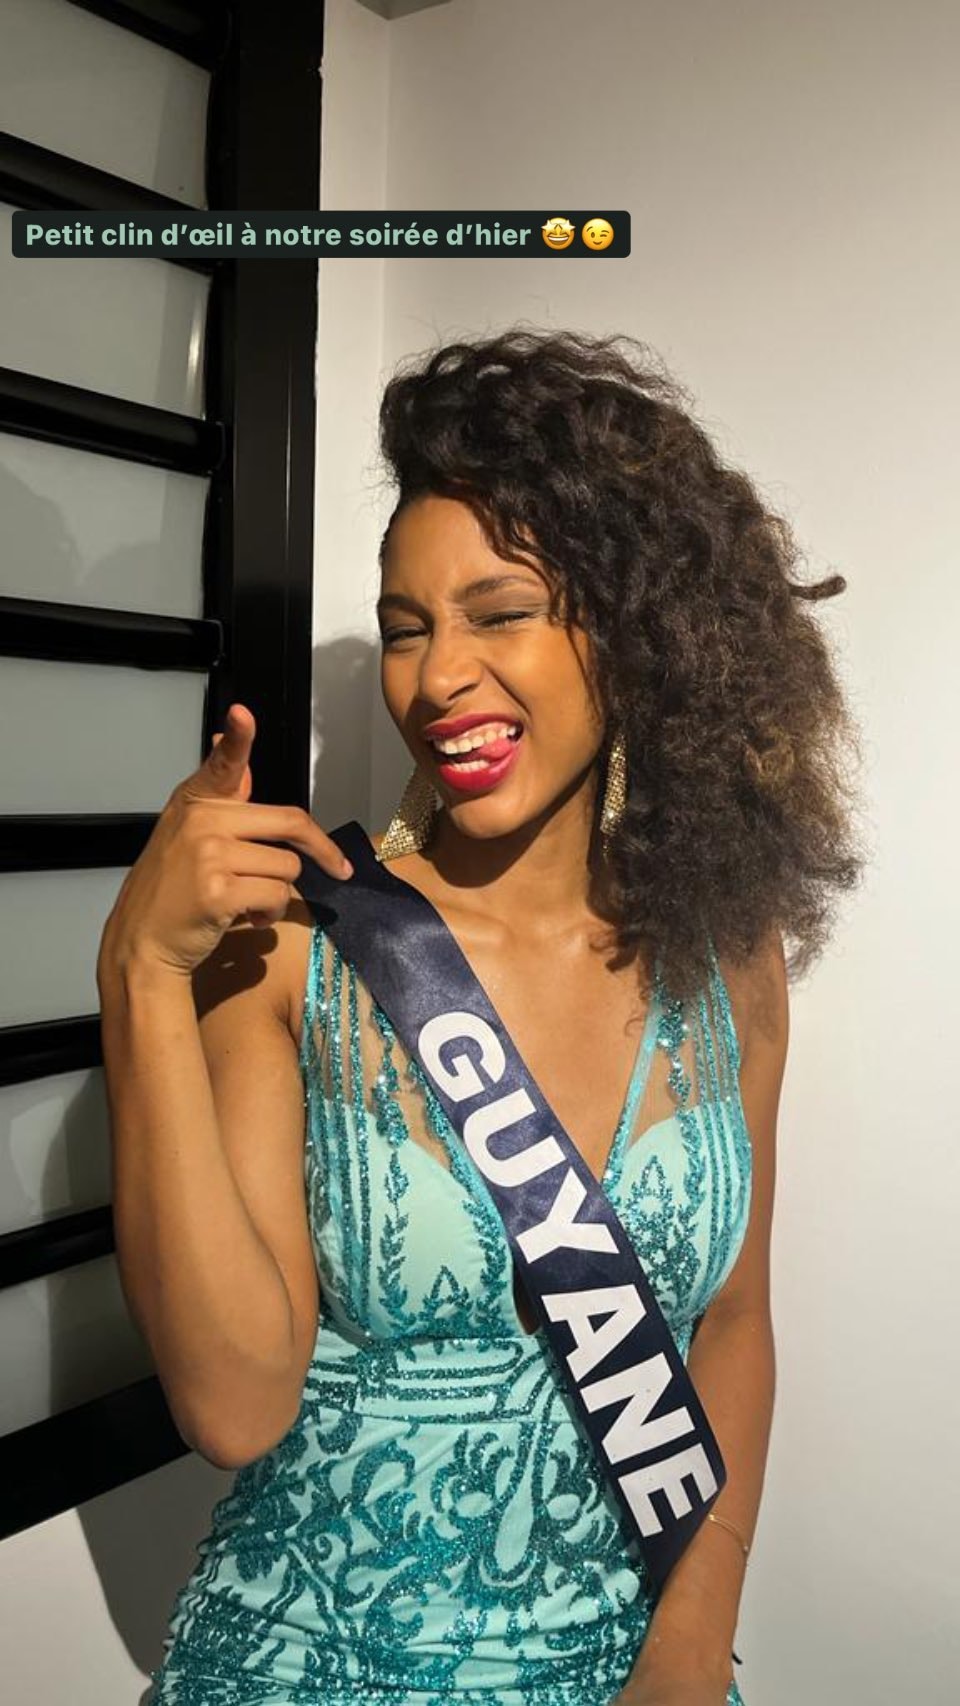 ROAD TO MISS FRANCE 2022 is Île-de-France - Page 5 25846210